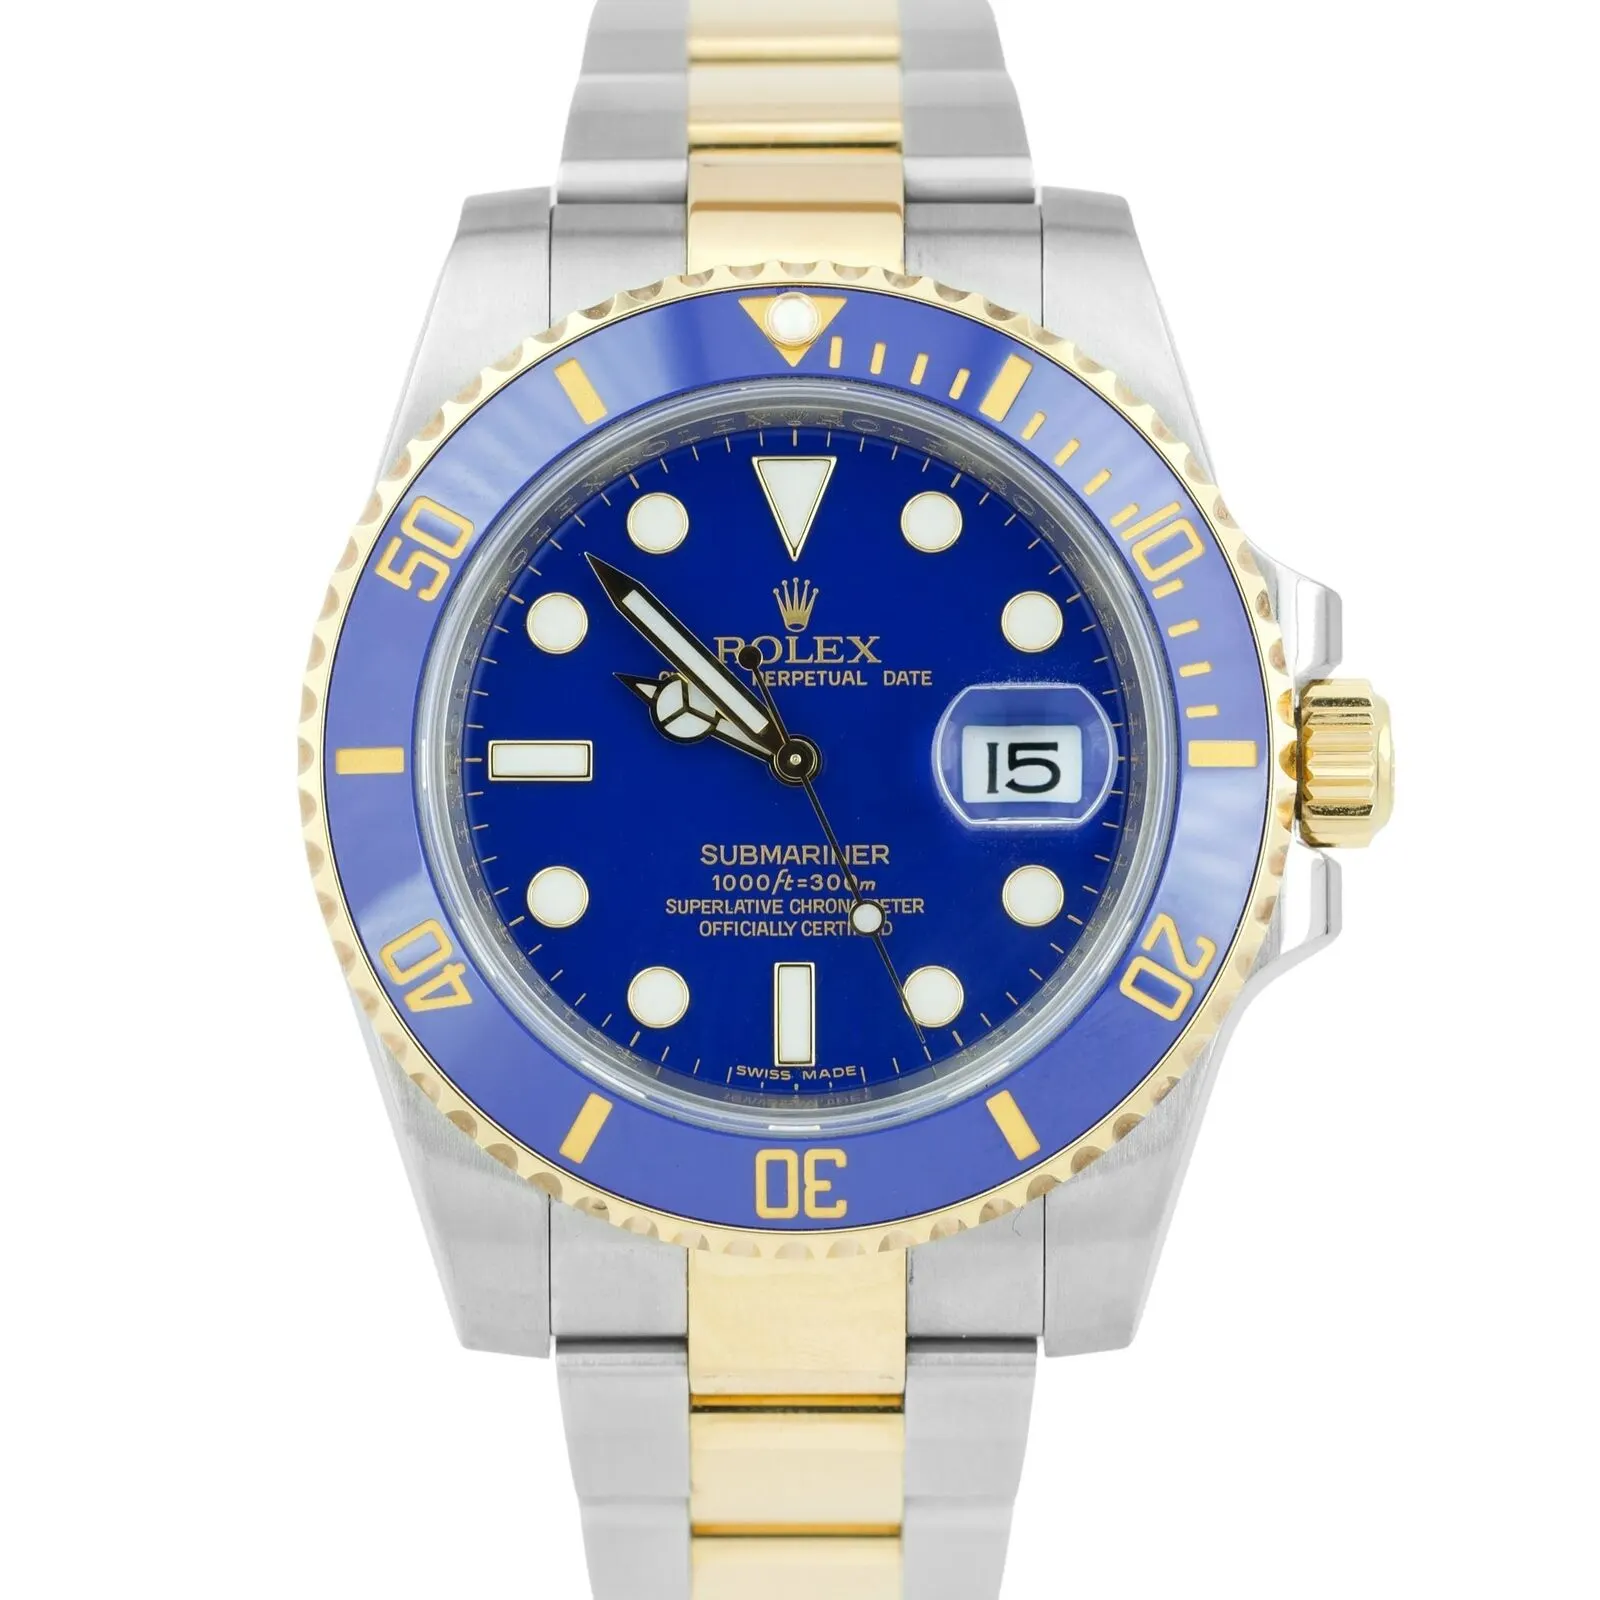 Rolex Submariner Date Two-Tone / Blue 116613LB-0005 Listing Image